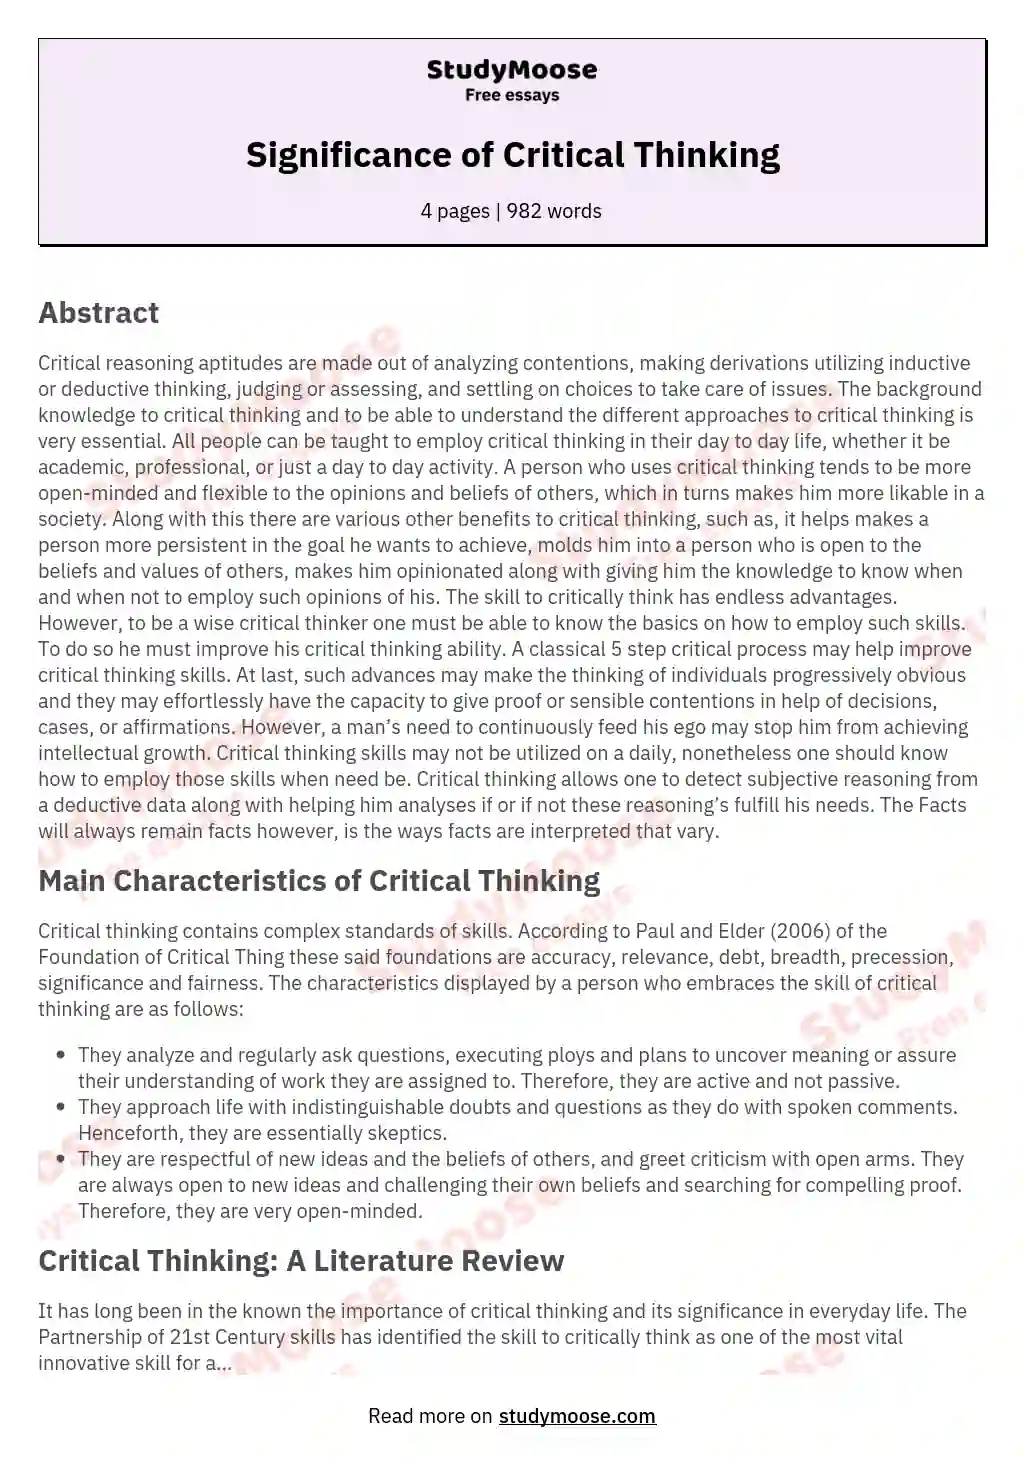 critical thinking essay examples